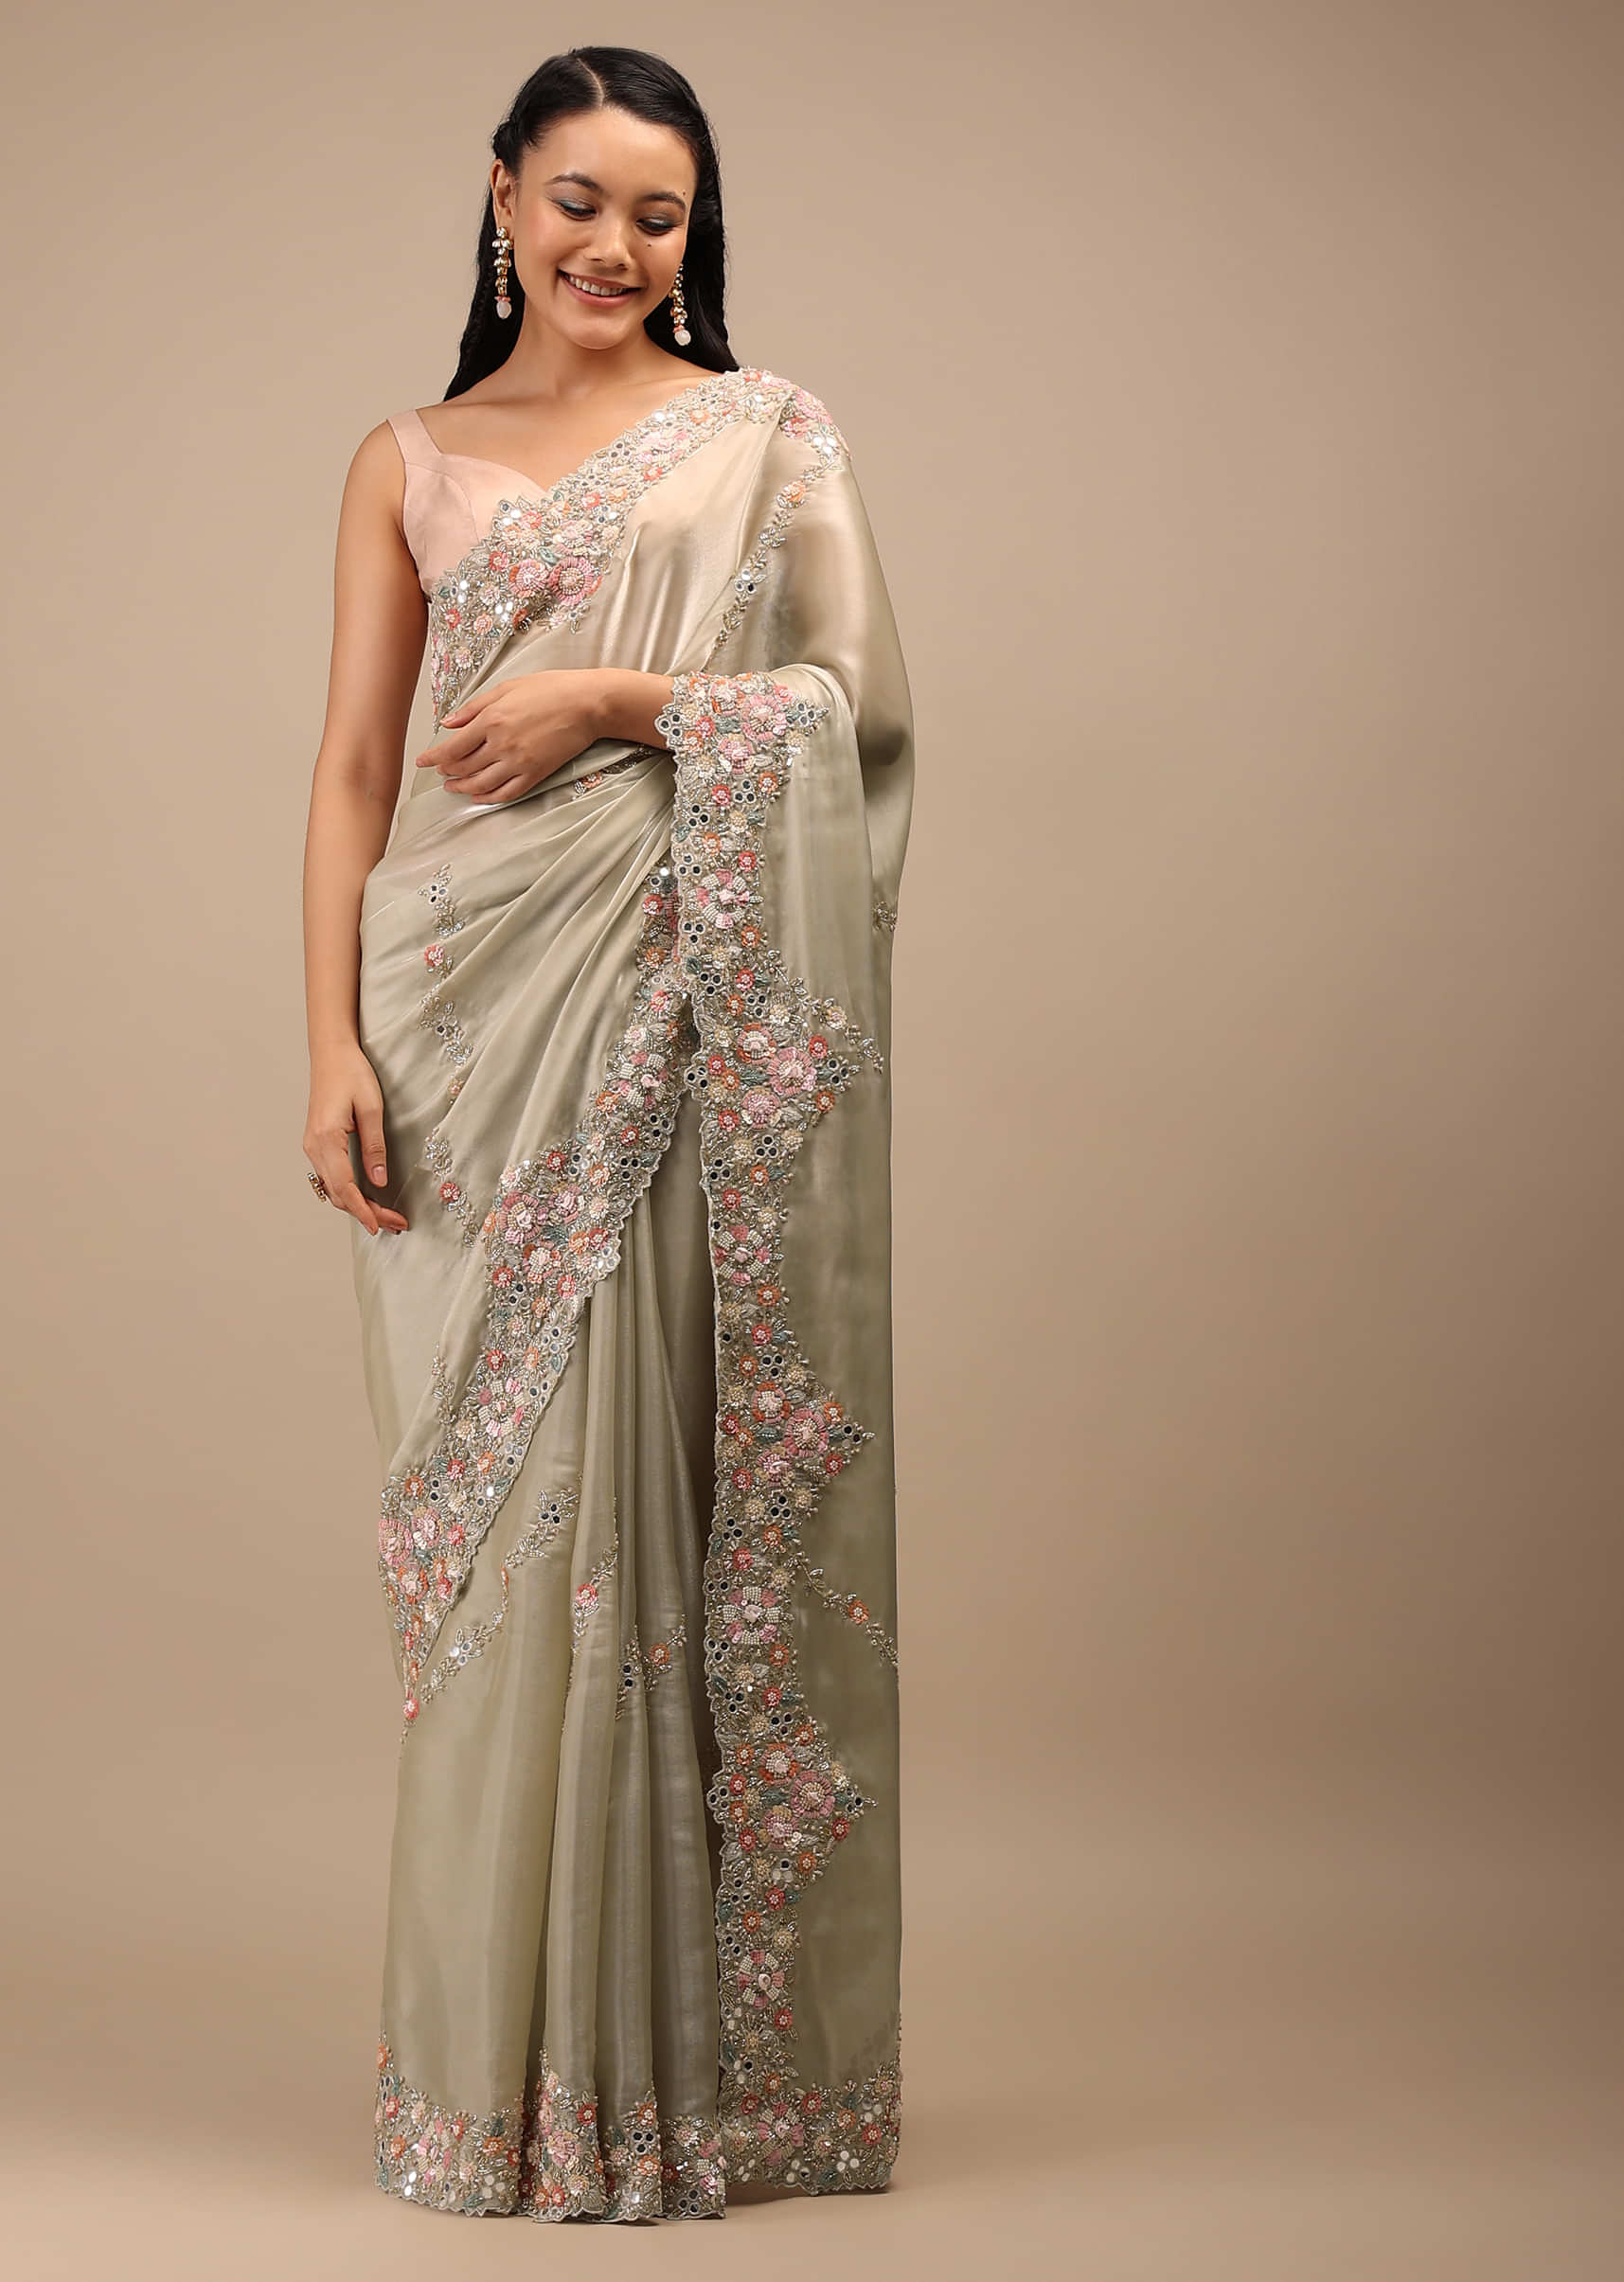 Eucalyptus Grey Glass Silk Saree In 3D Floral Motifs On The Border, Embroidered Border In Multi-Color Sequins And Lace